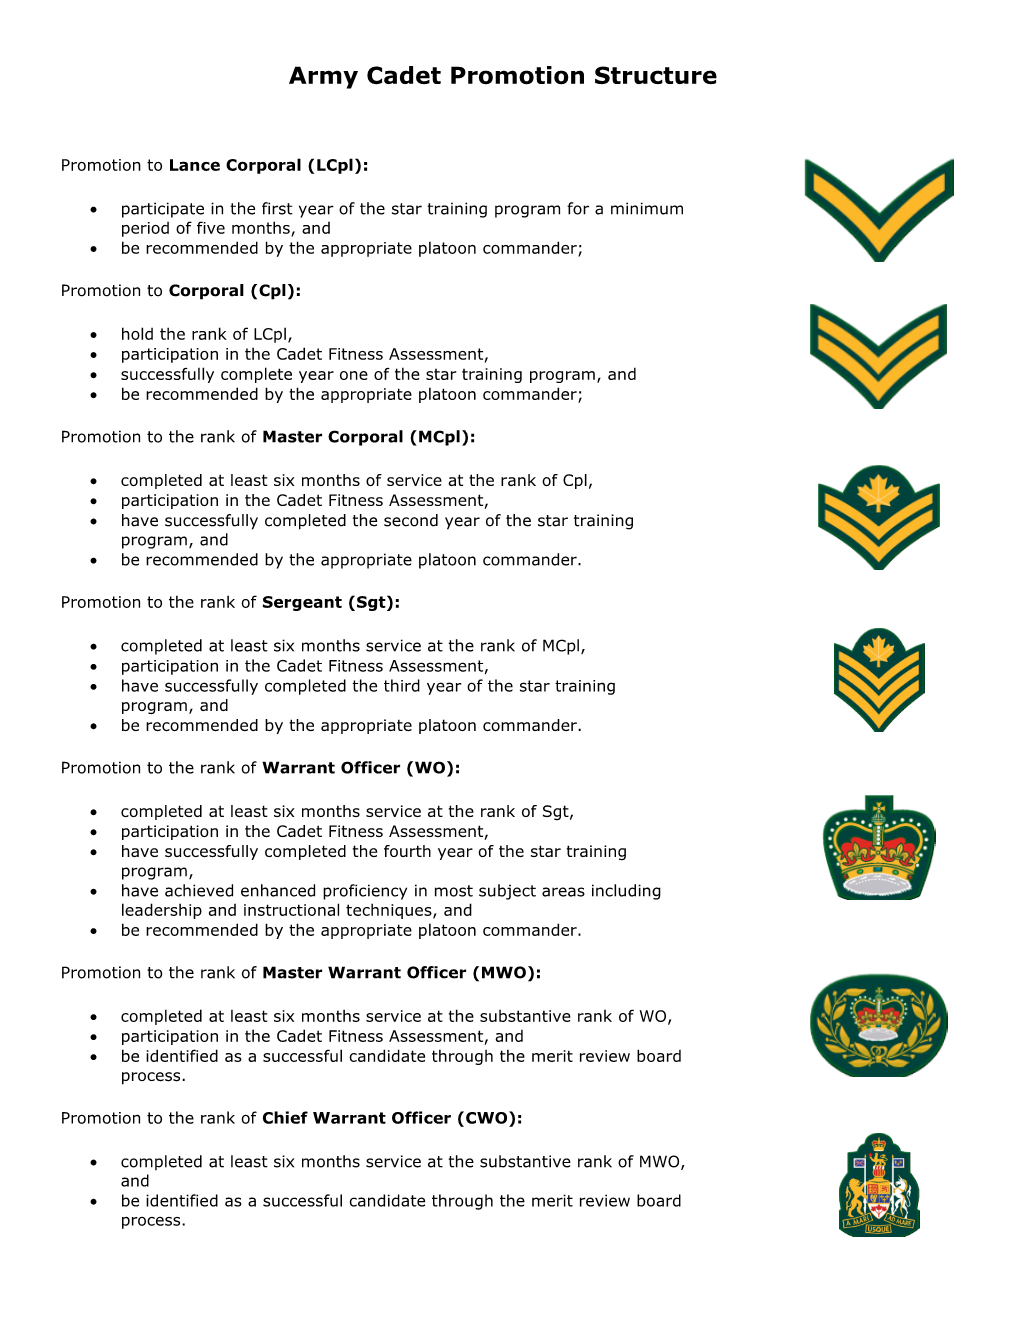 Army Cadet Promotion Structure